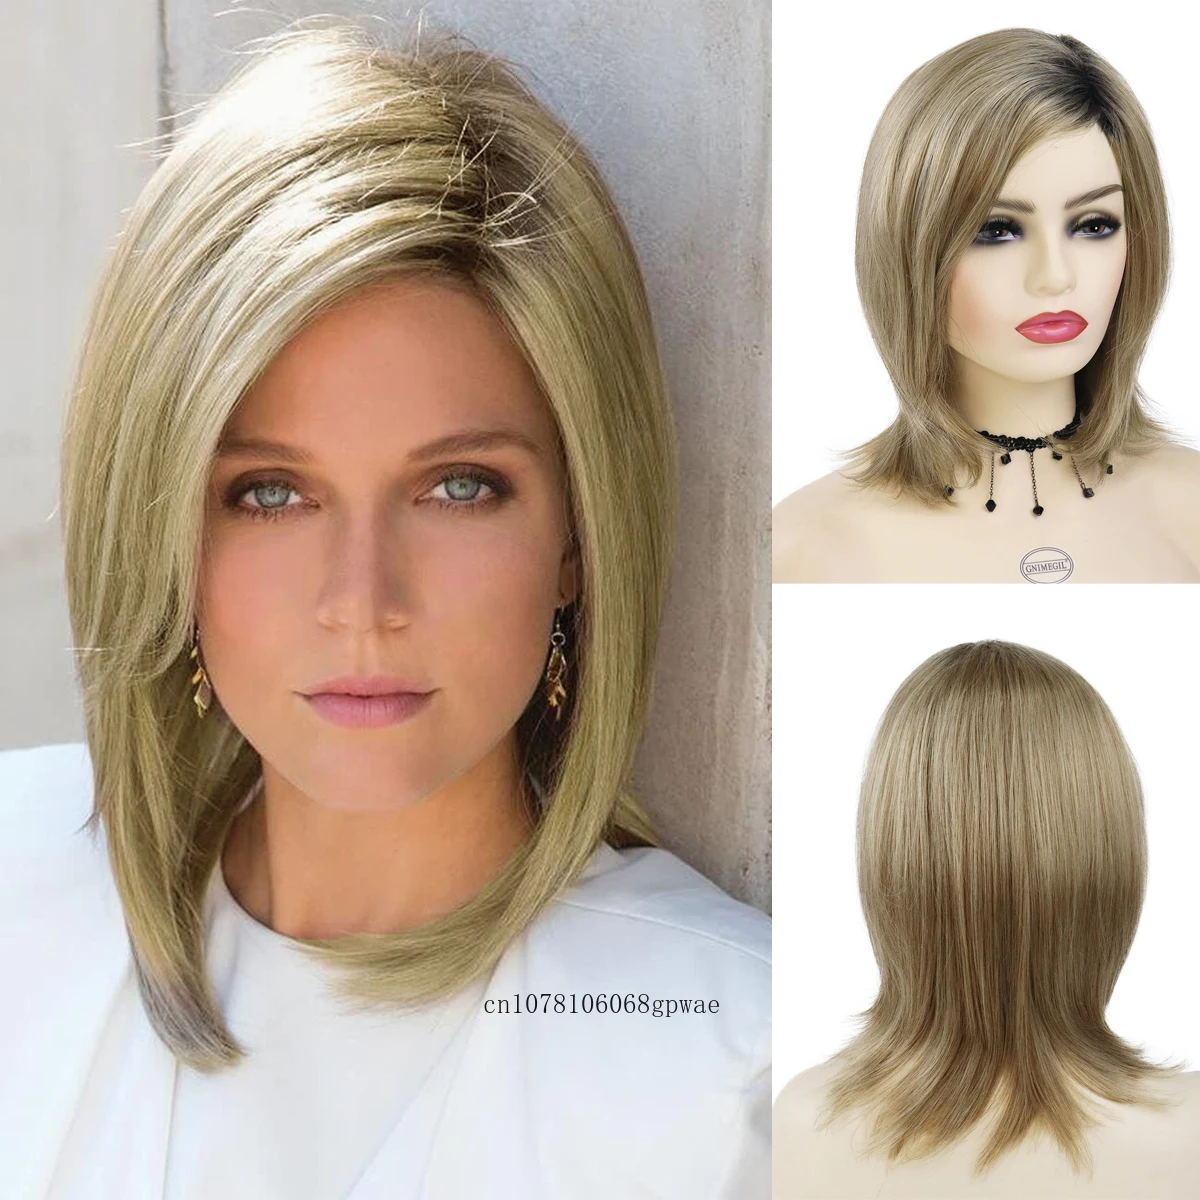 

Natural Straight Bob Haircut Synthetic Blonde Ombre Wig Side Parting Hair Short Wigs for Women Daily Casual Cosplay Halloween